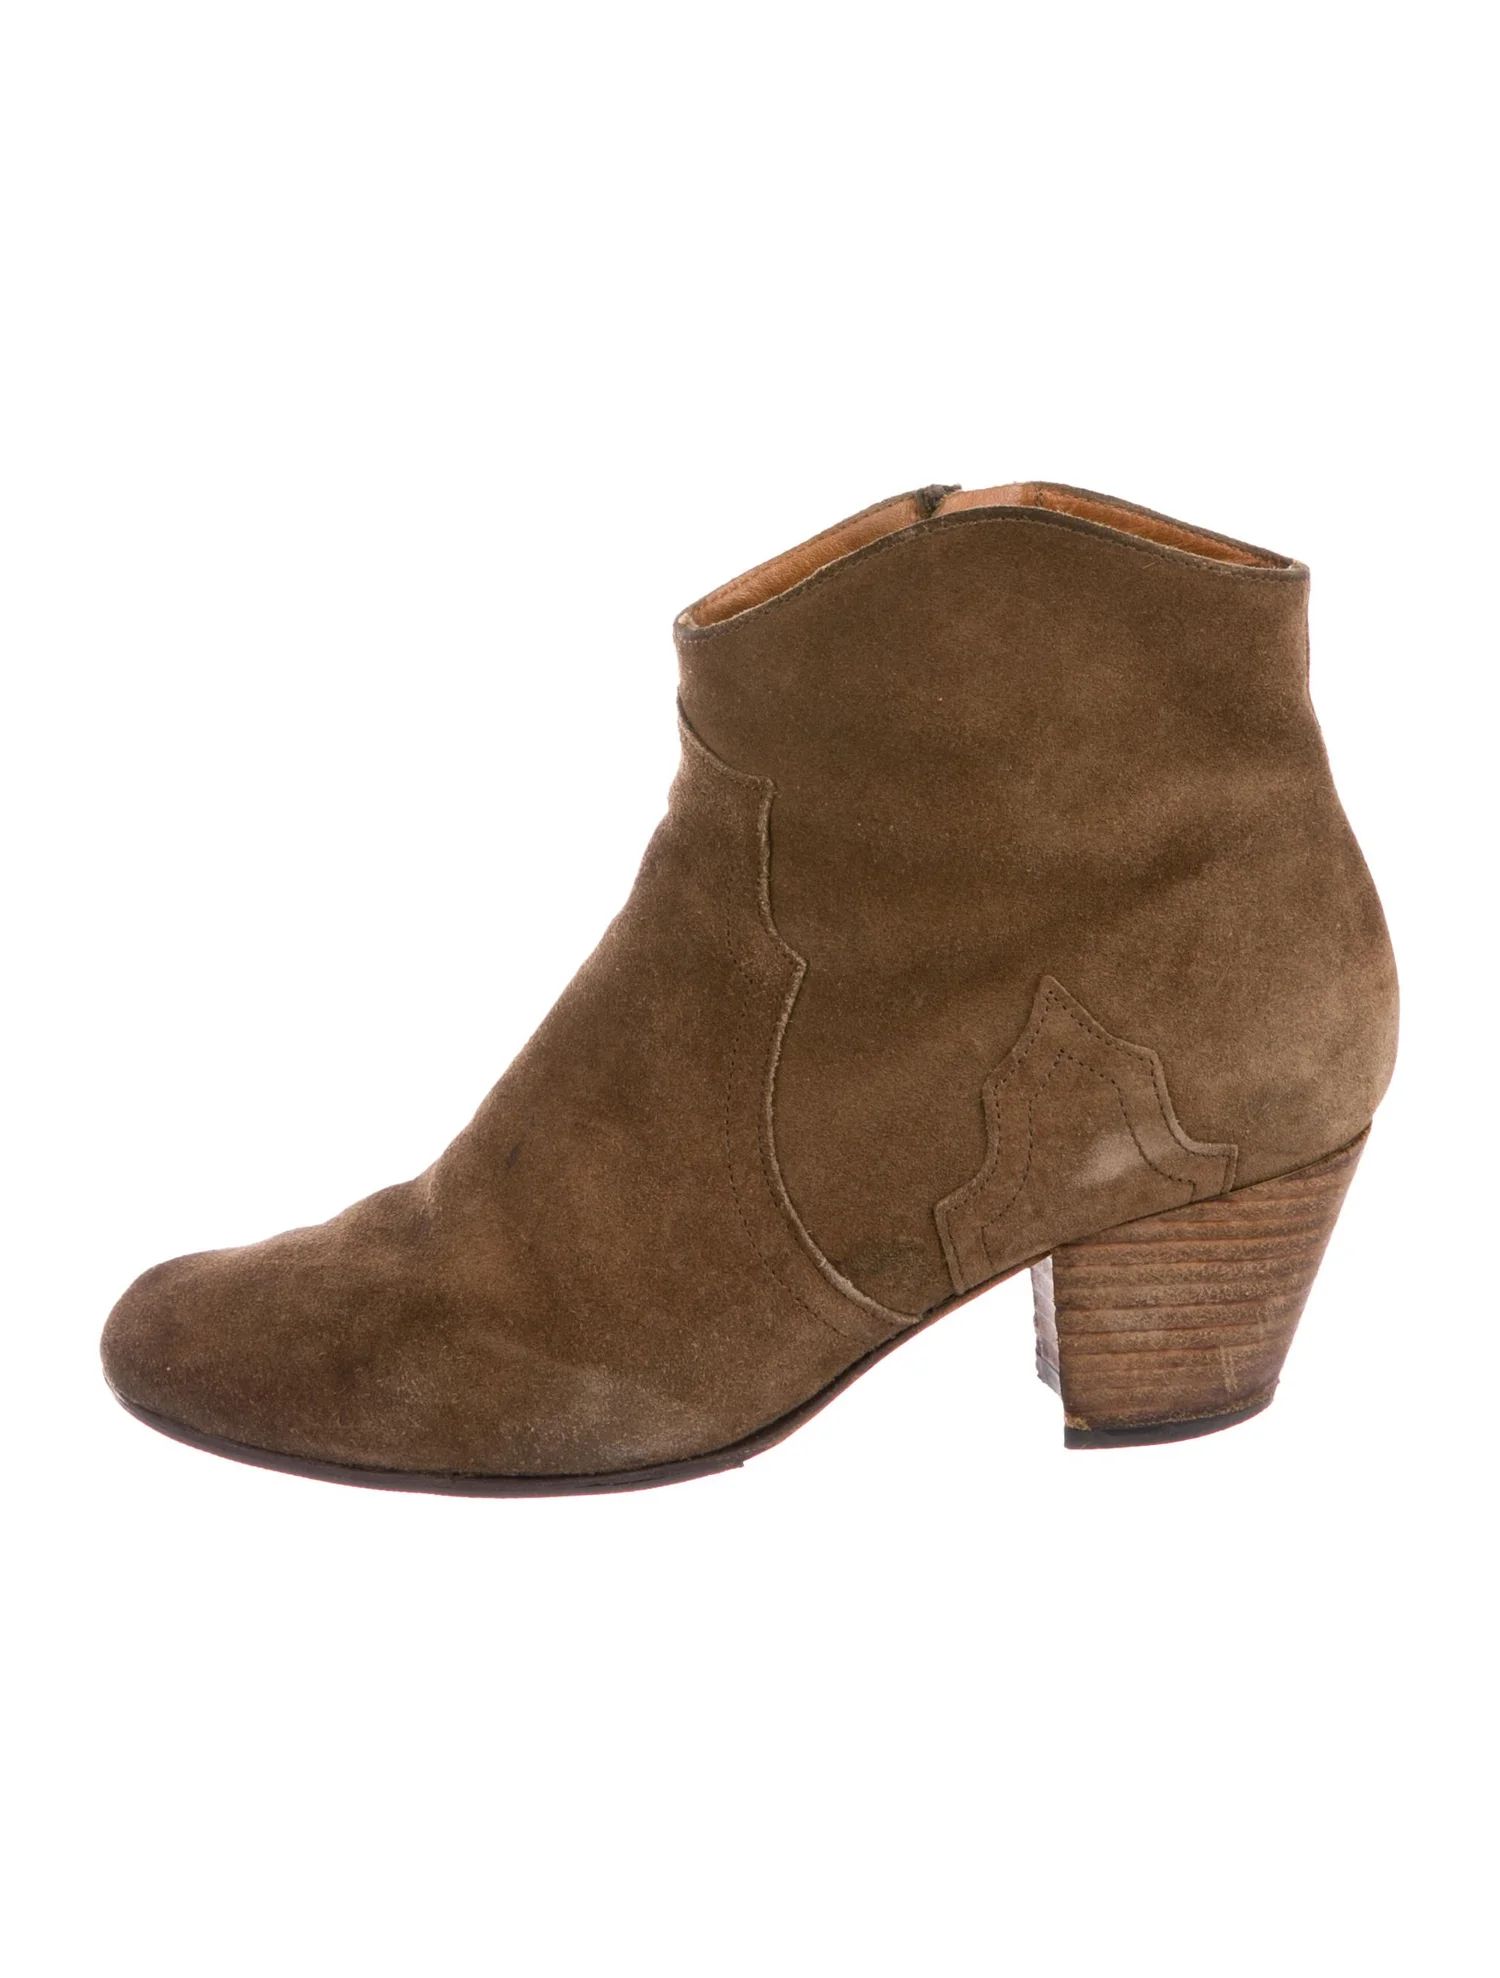 Isabel Marant Dicker Suede Ankle Boots - Shoes -
          ISA69460 | The RealReal | The RealReal